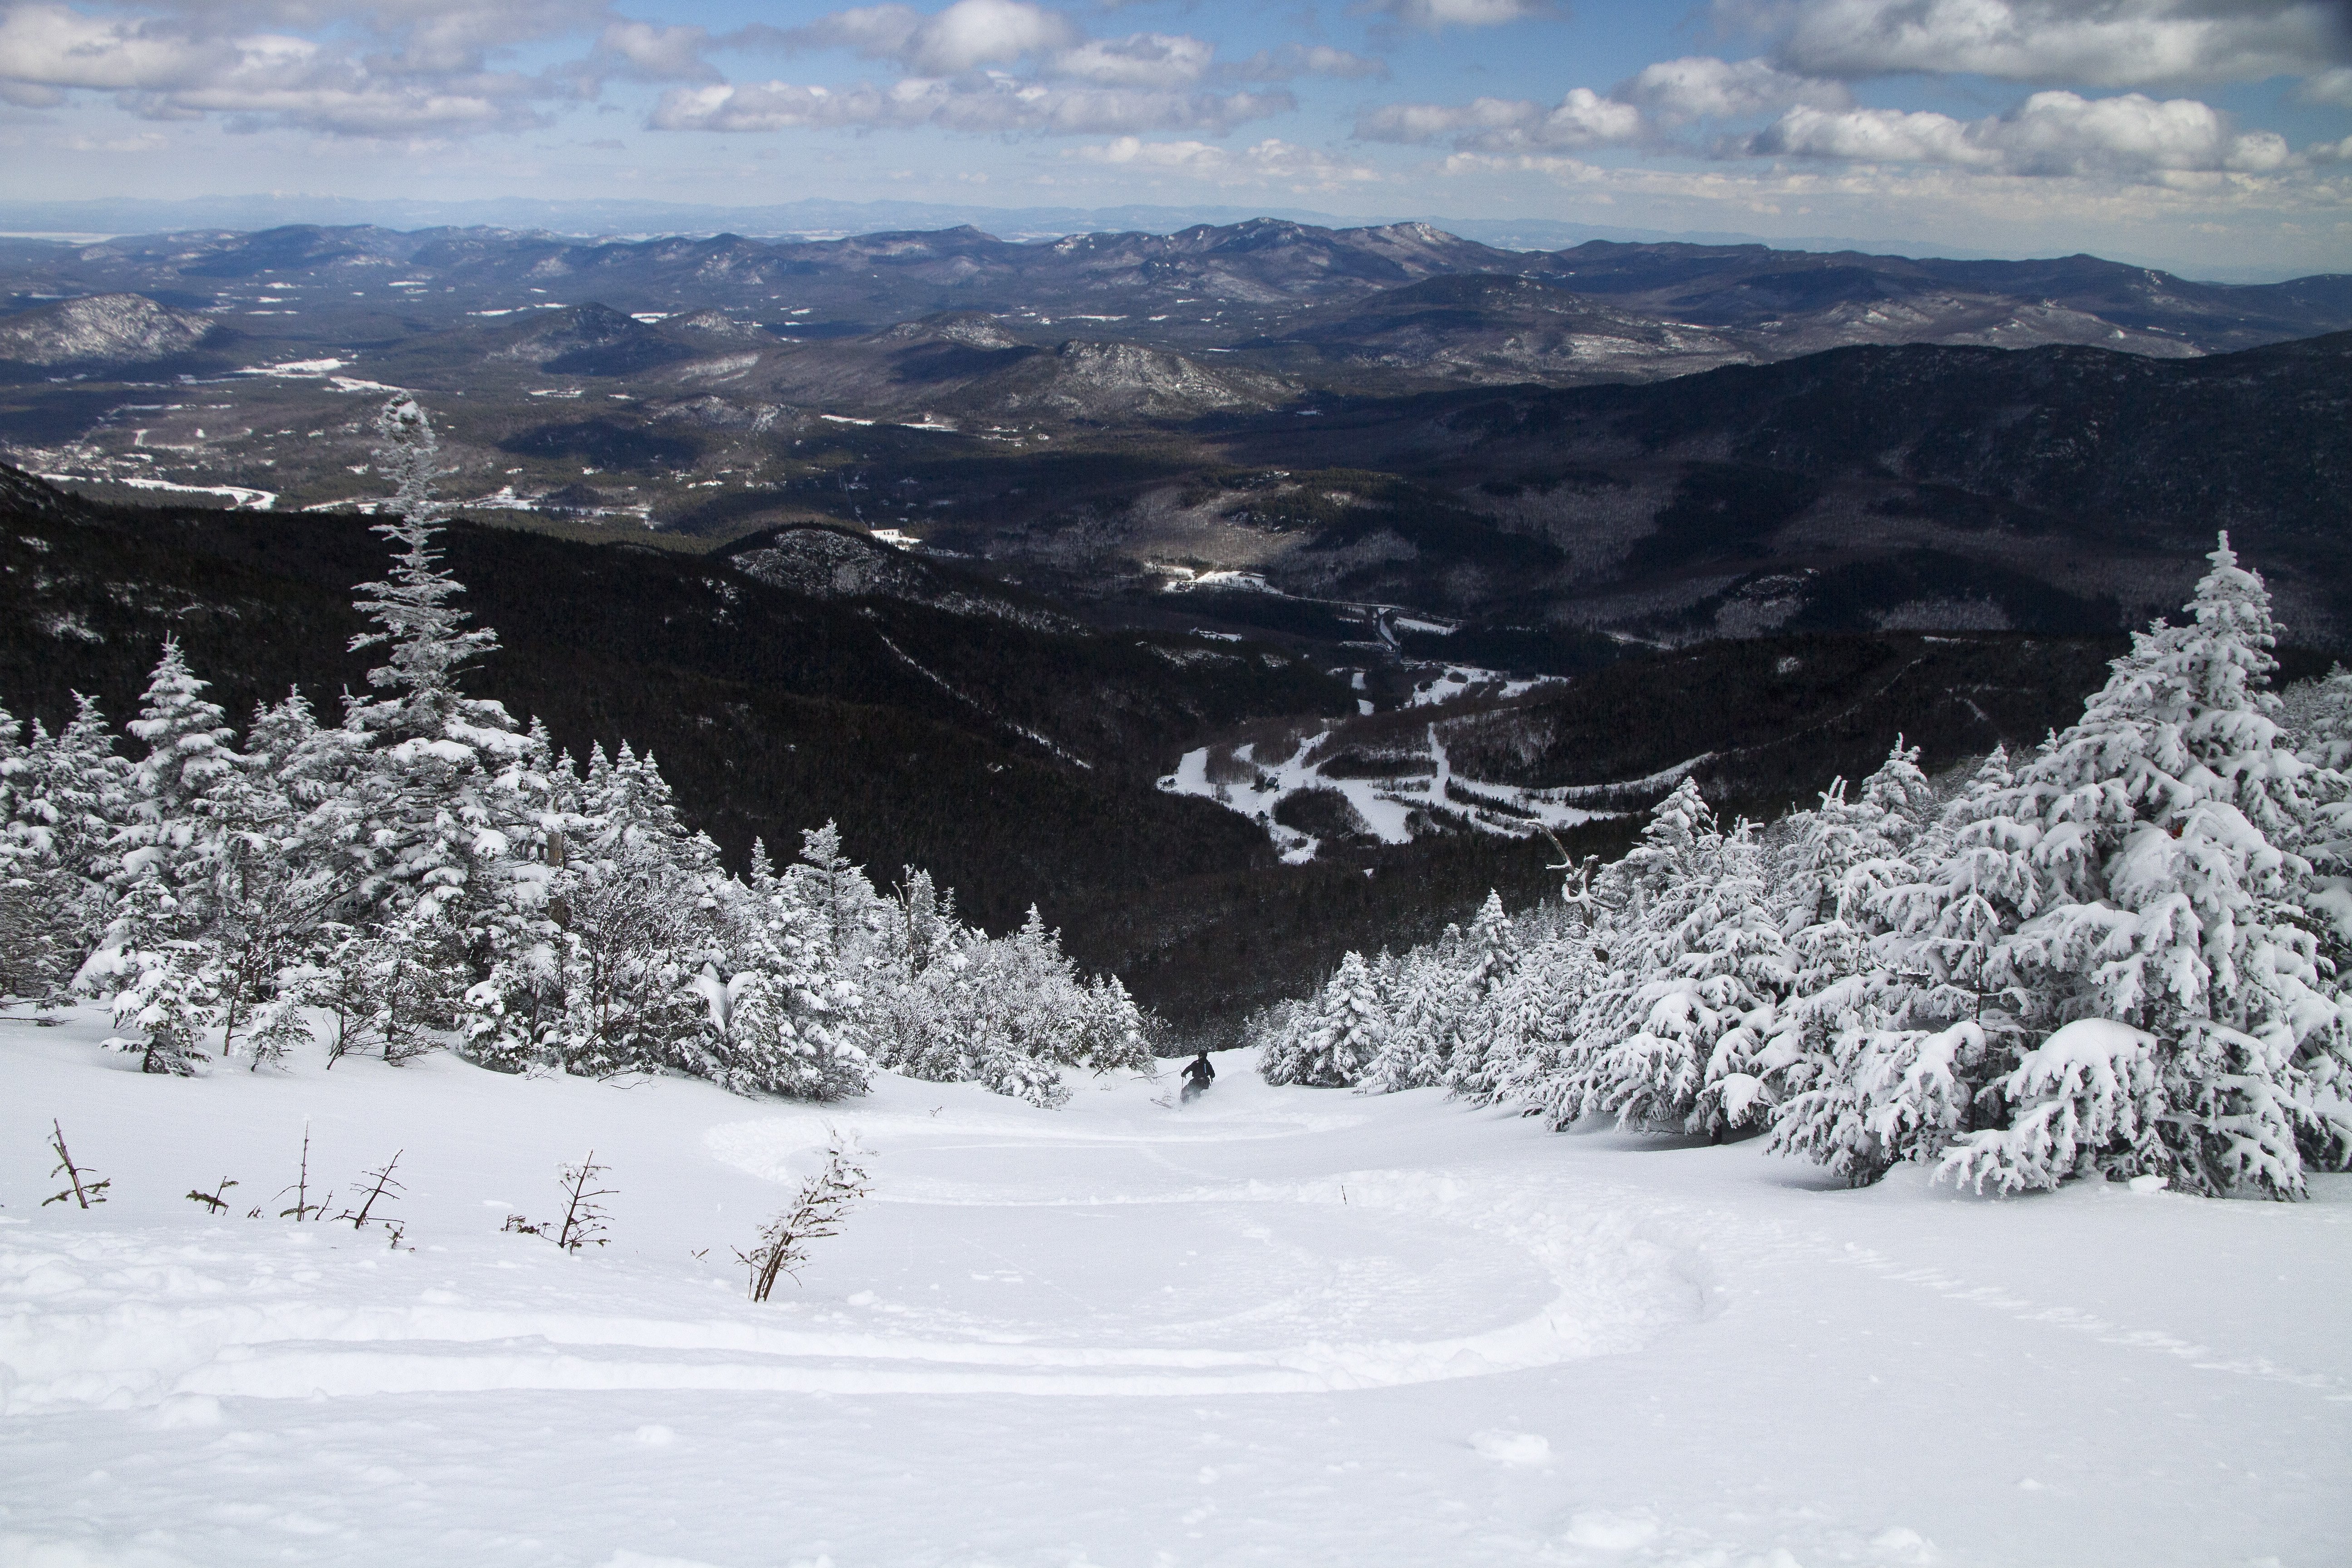 Coronavirus in NY: Ski resorts can open next month with 